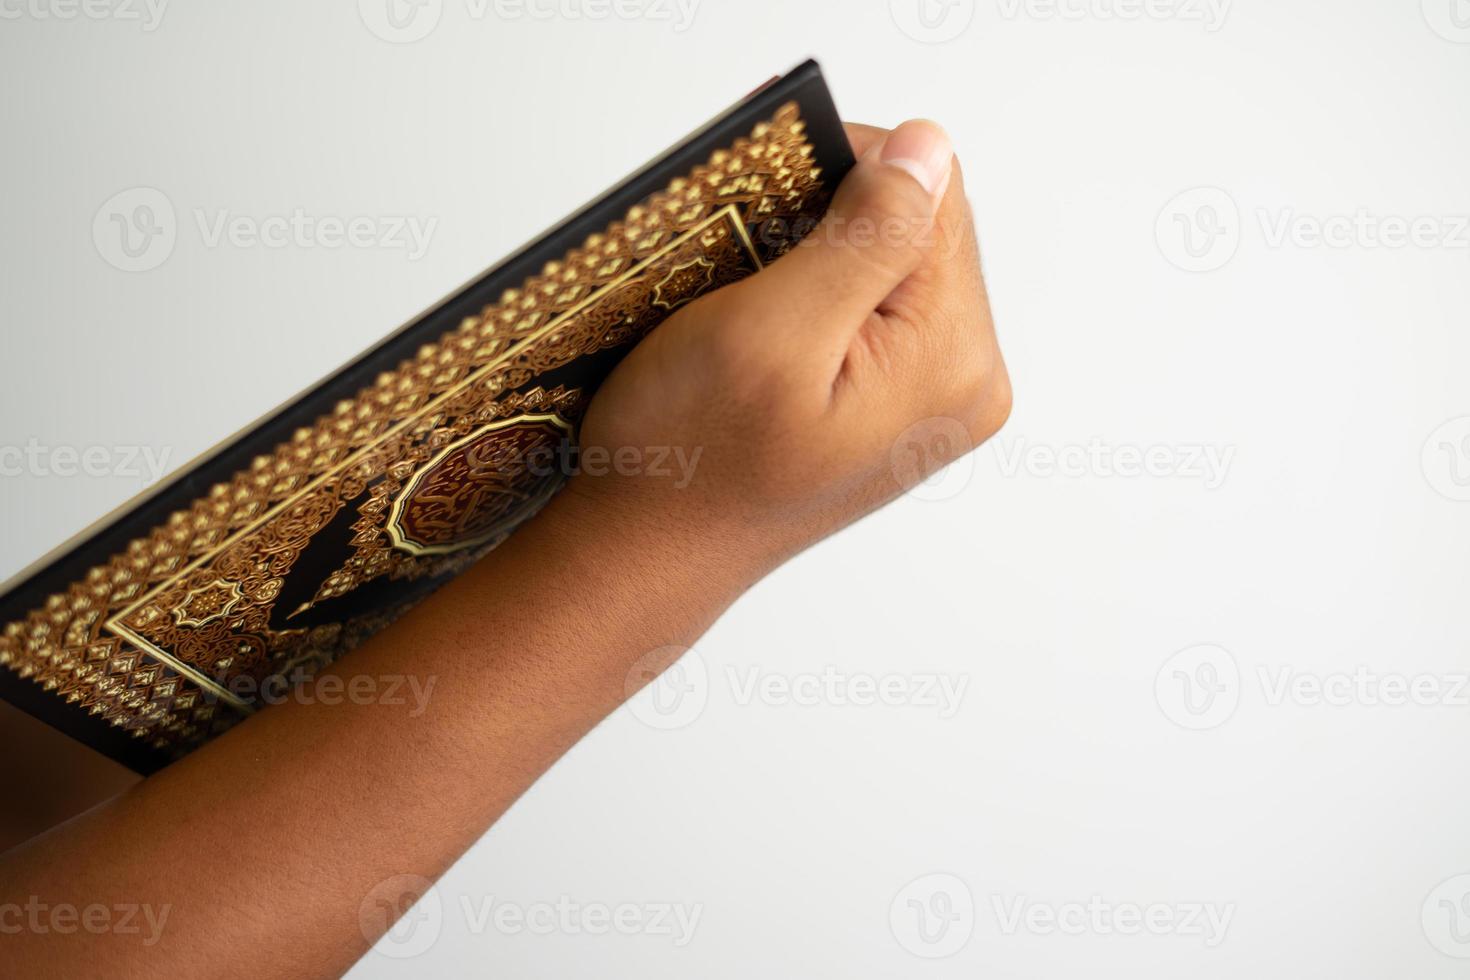 hand holding a Quran book from side angle photo